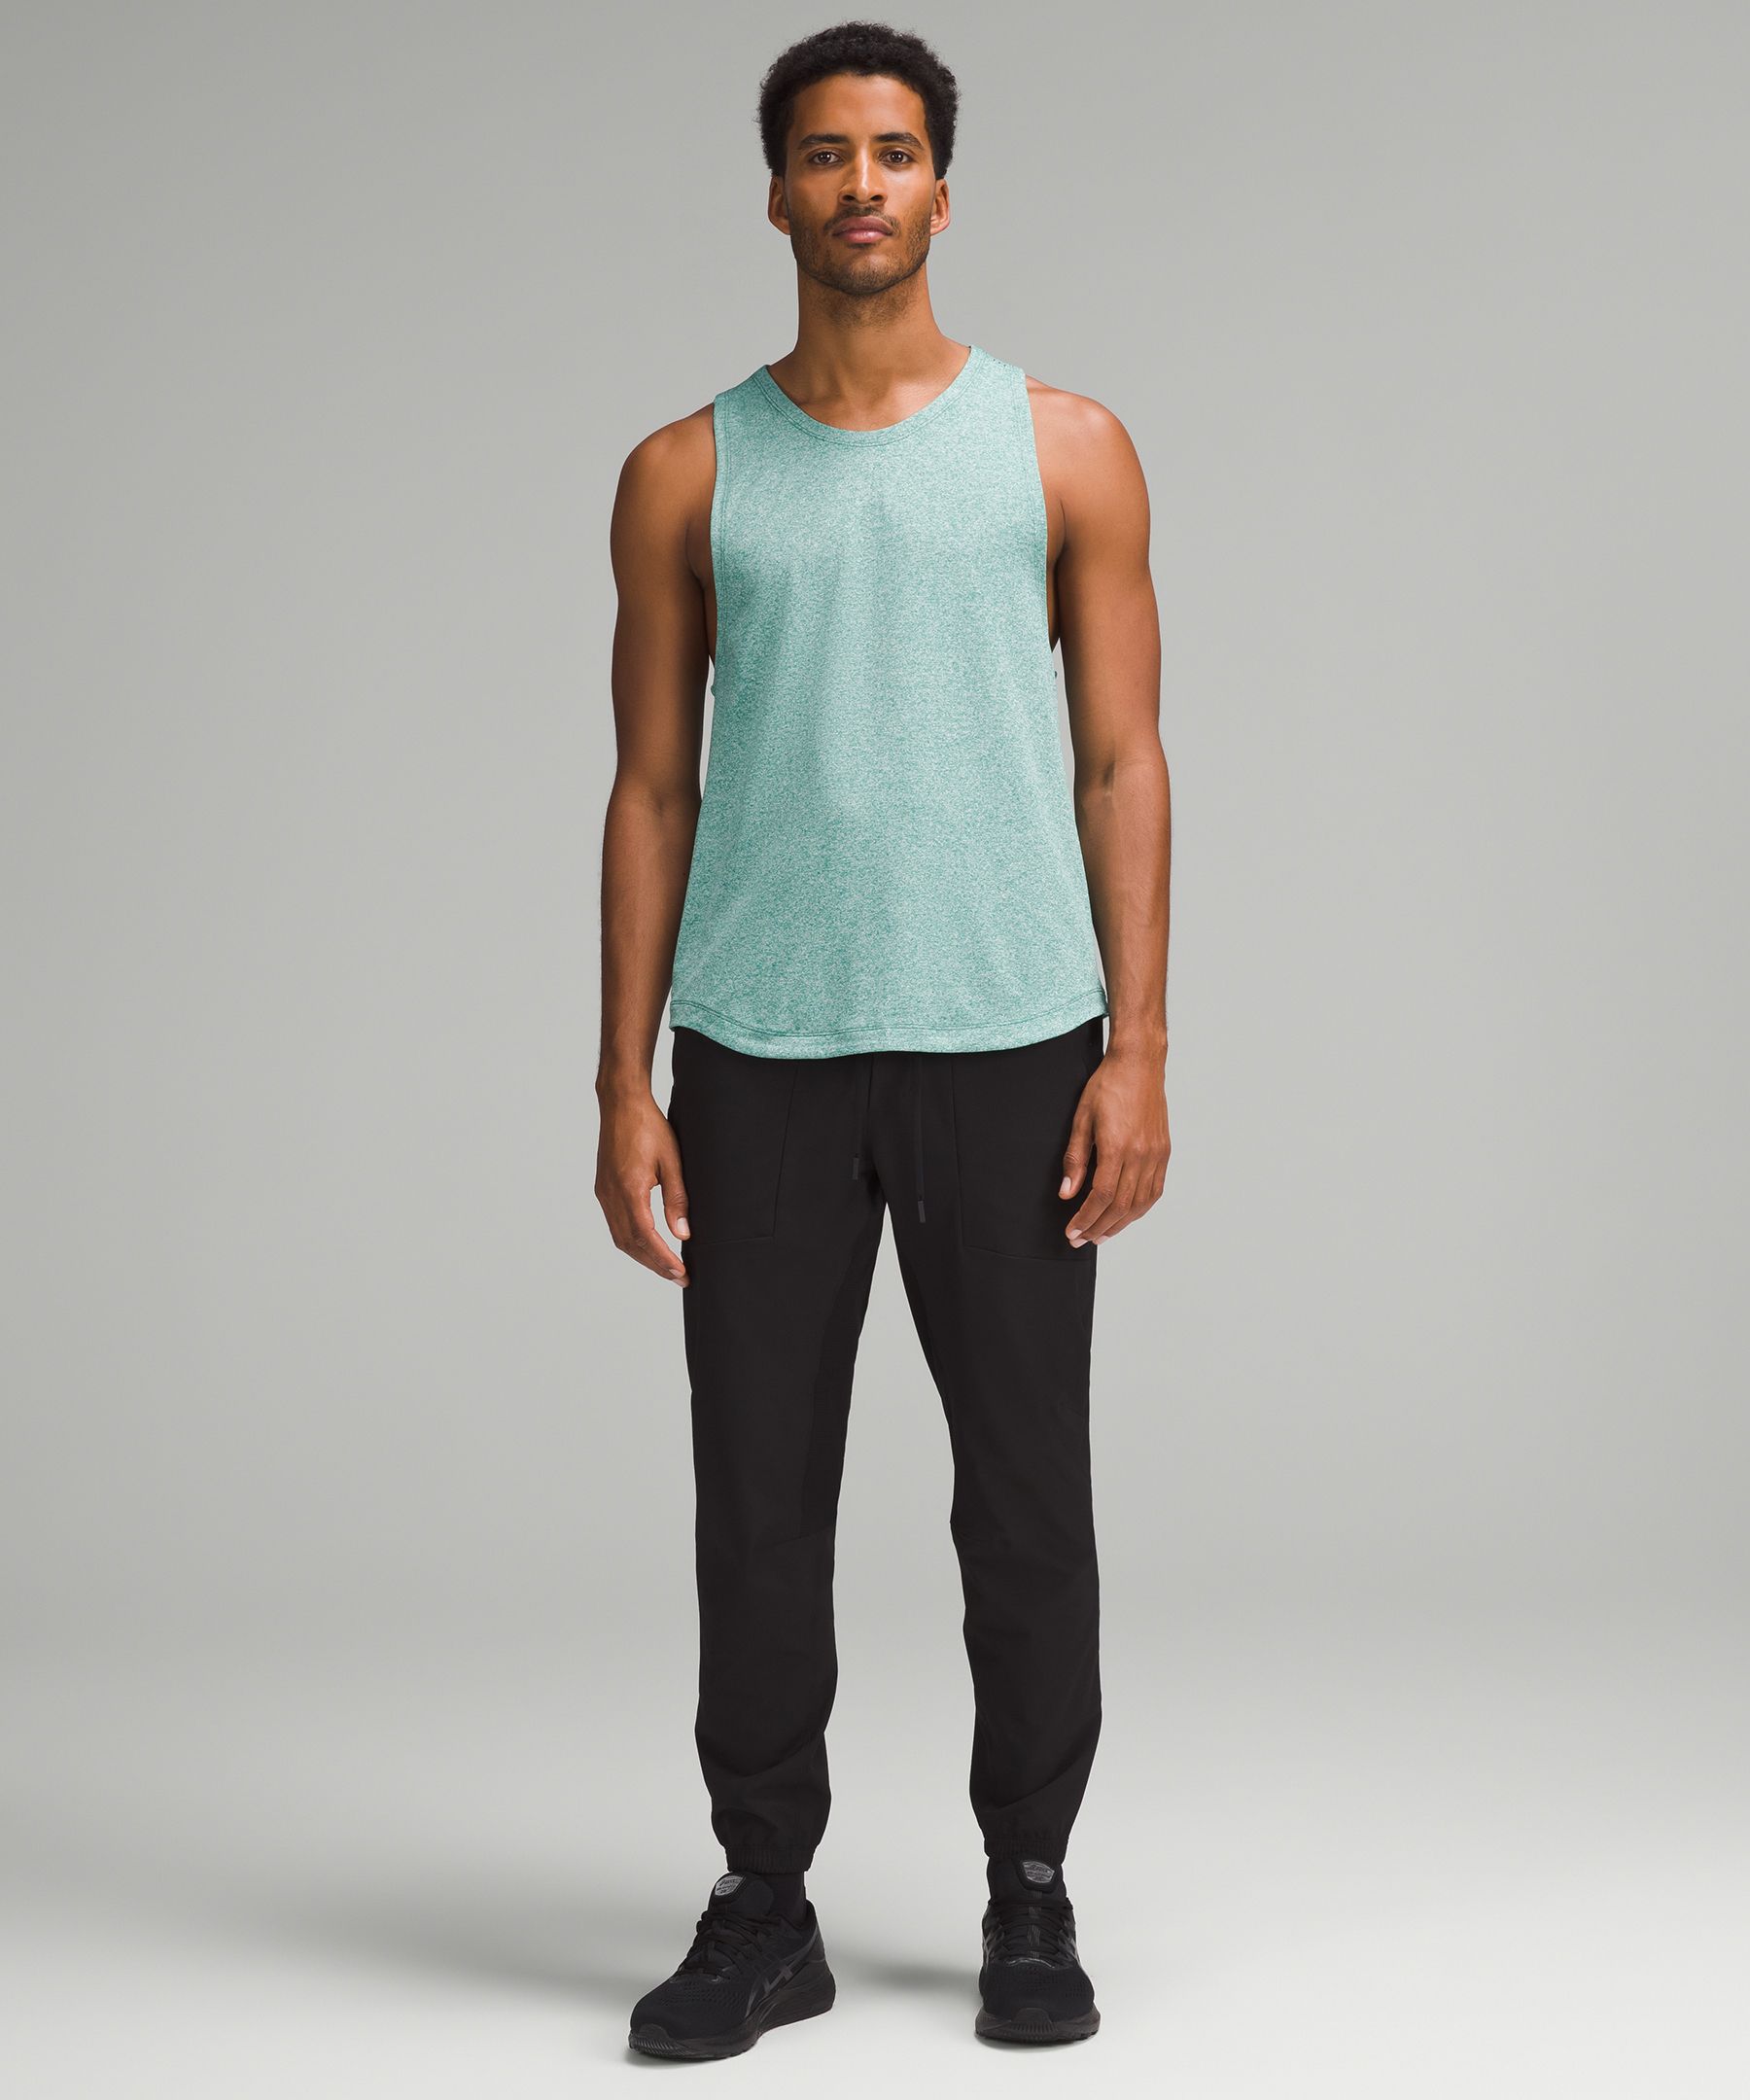 technical apparel + athletic shoes | lululemon Canada